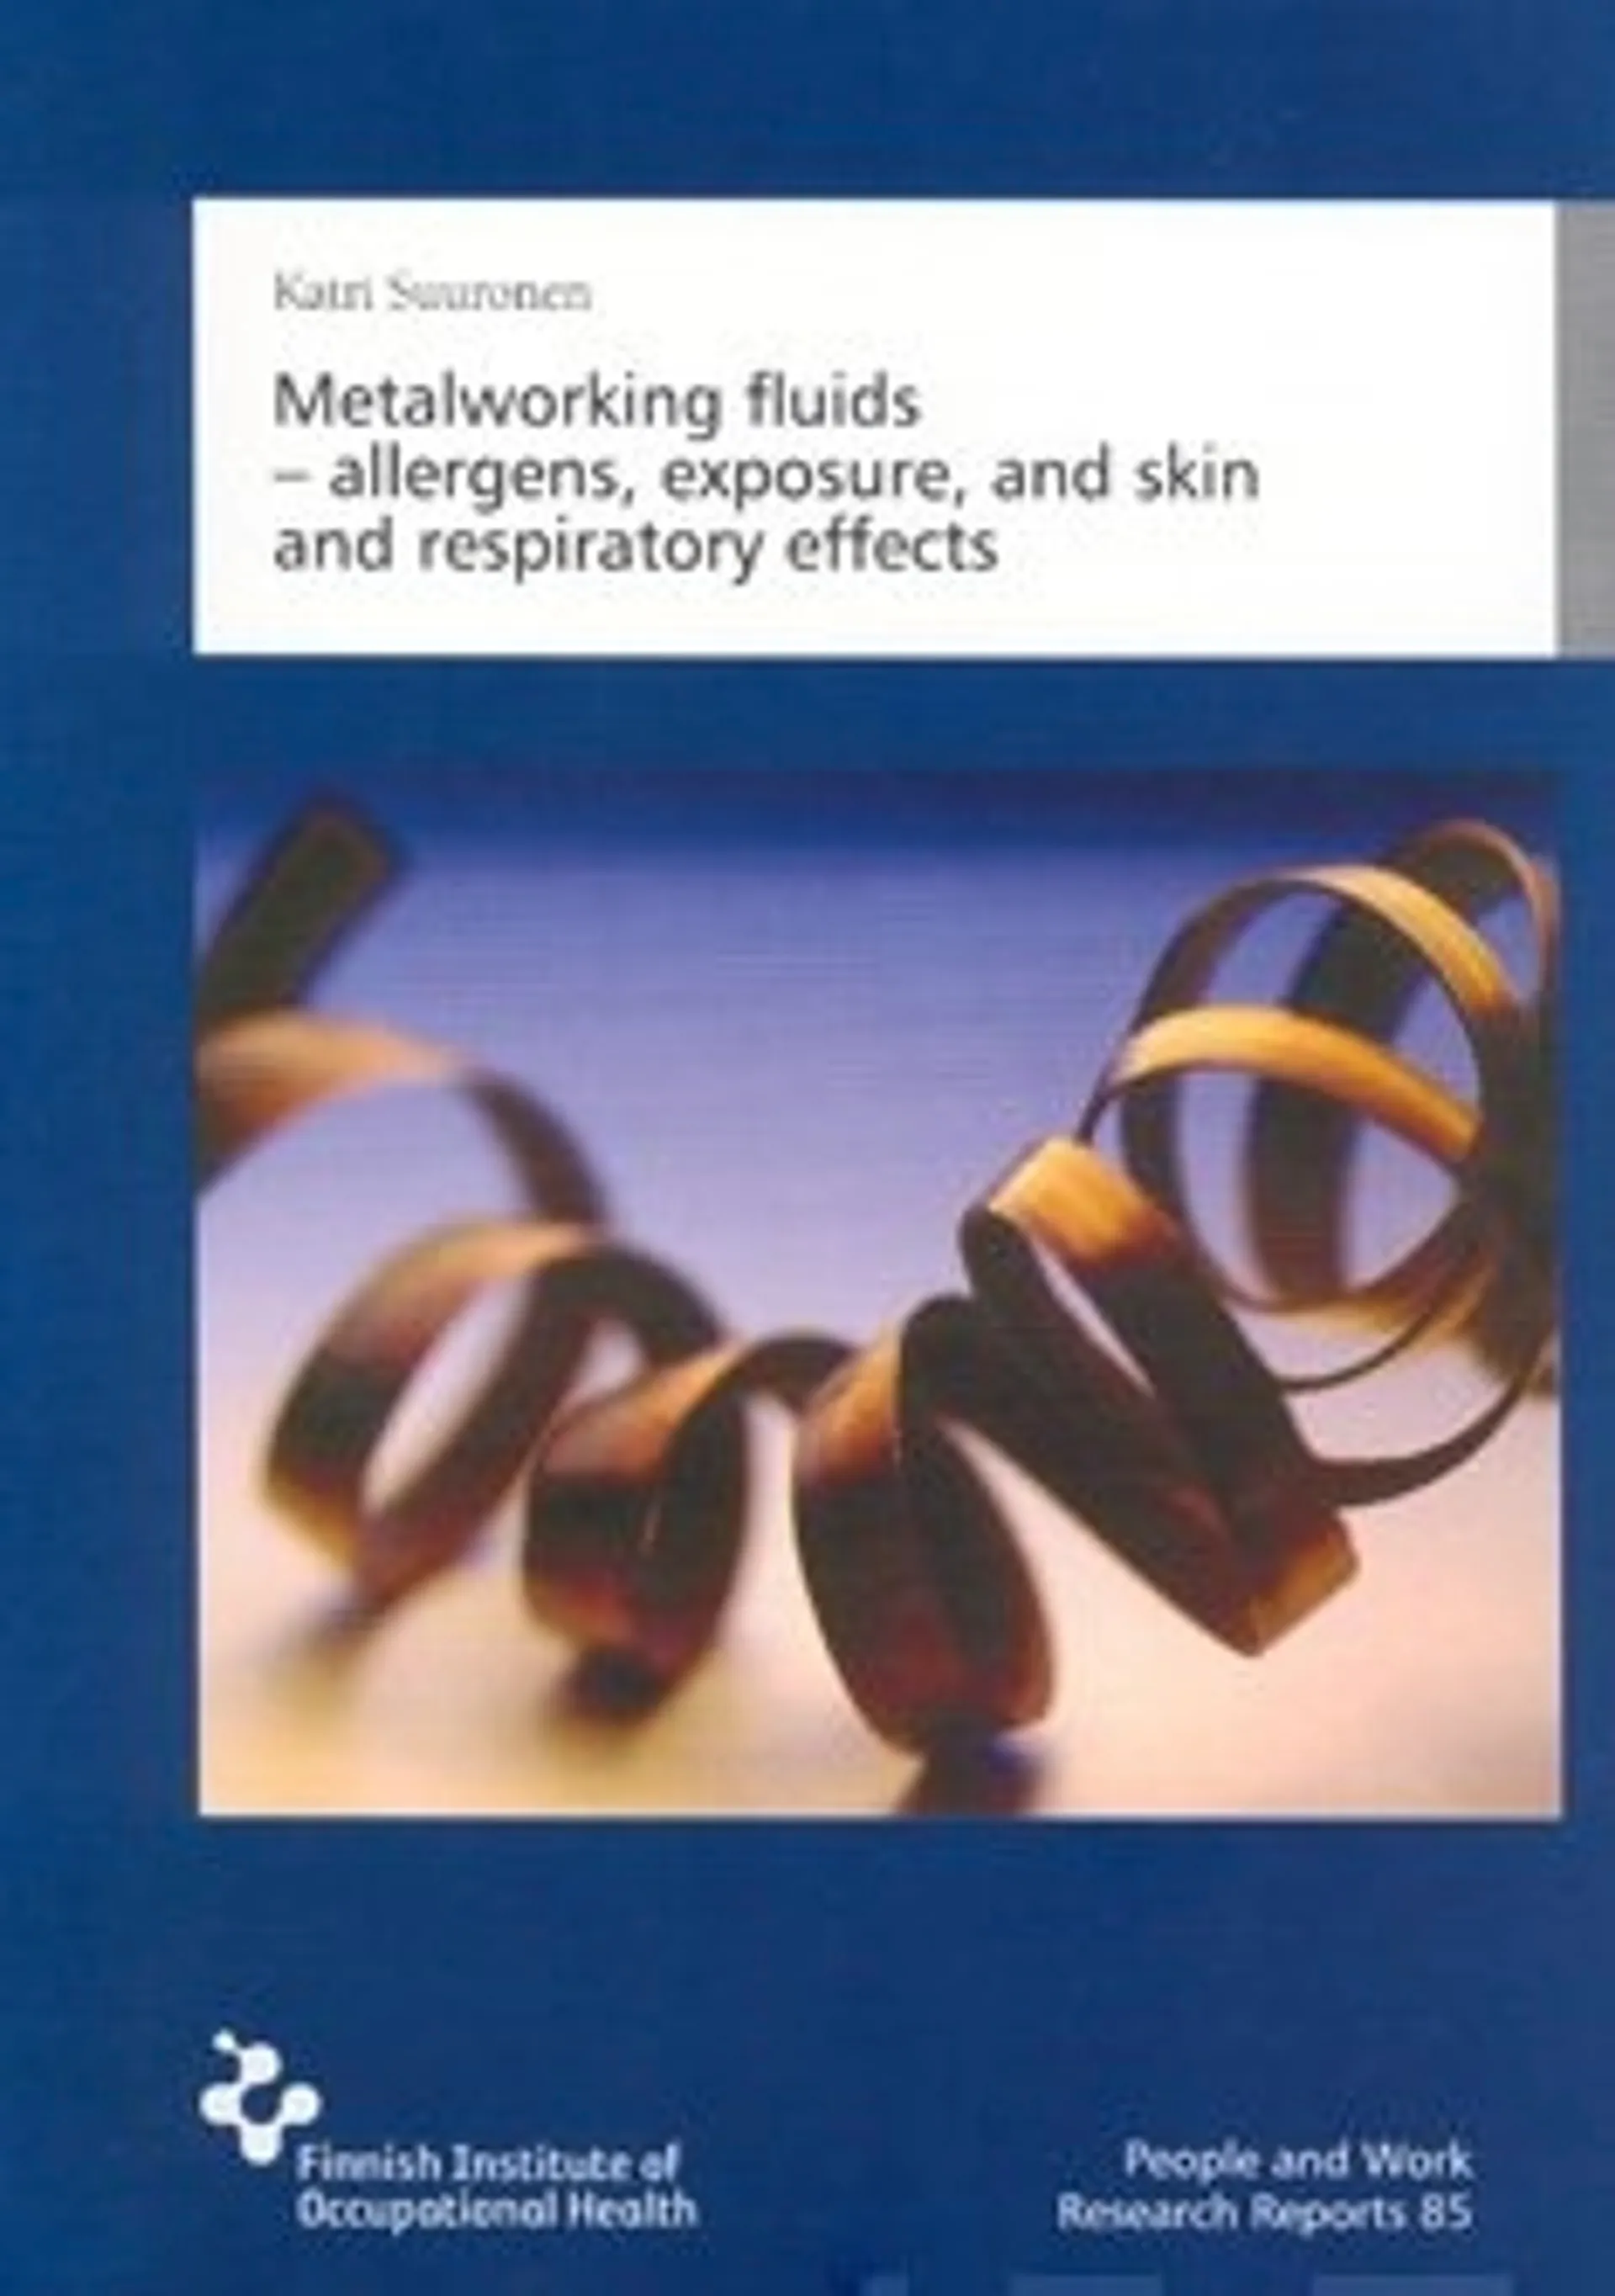 Metalworking fluids -allergens, exposure, and skin and respiratory effects